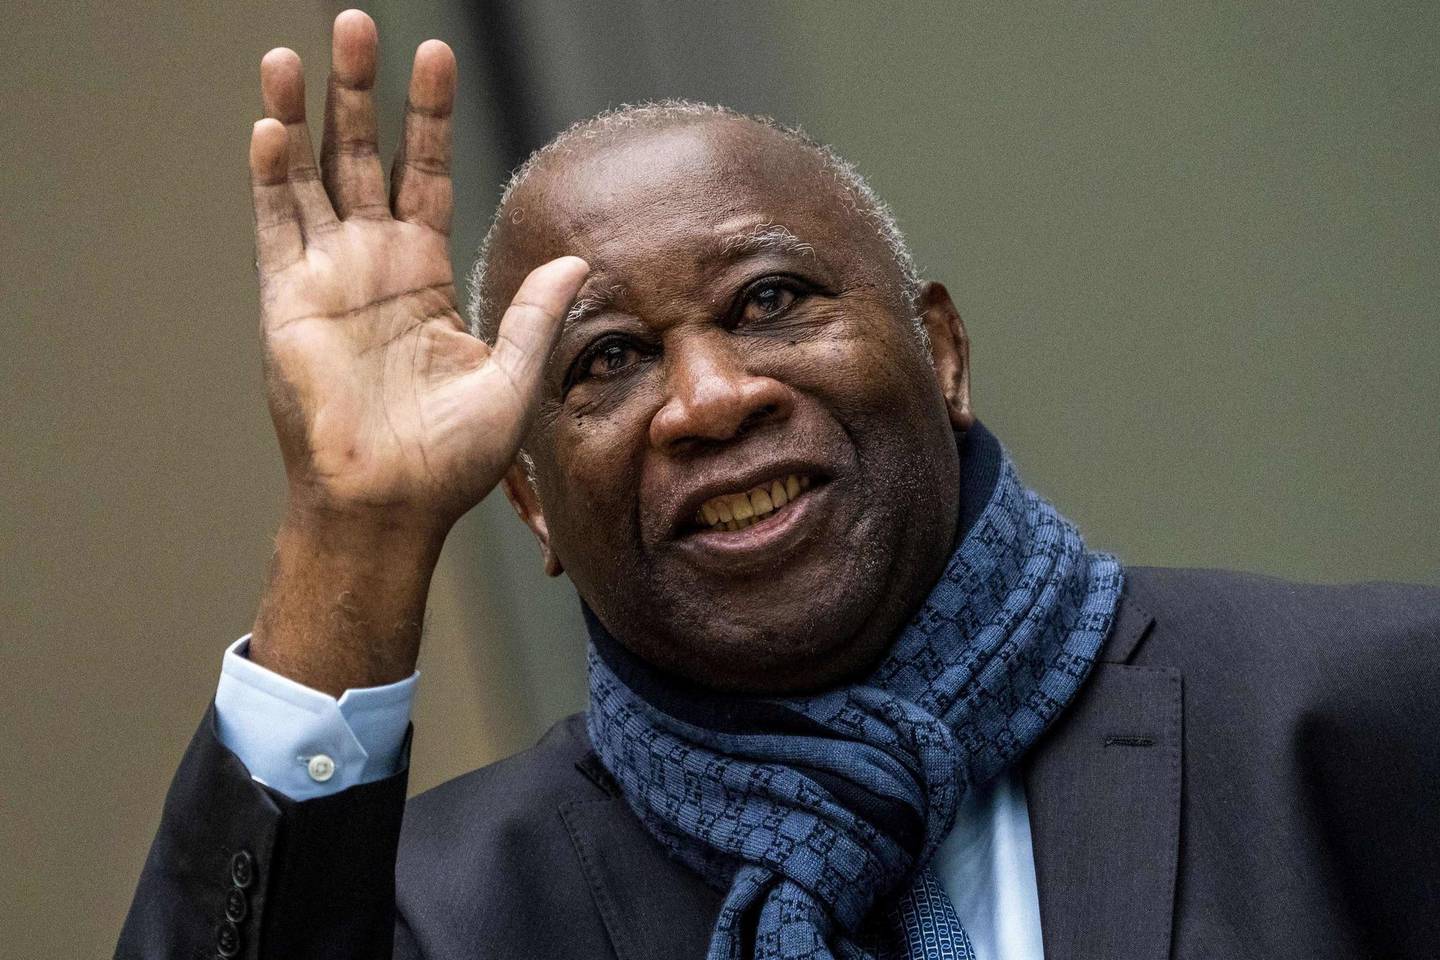 (FILES) In this file photo taken on February 6, 2020, former Ivory Coast President Laurent Gbagbo arrives at the courtroom prior to the opening of a hearing concerning his request for unconditional release at the Board of Appeal of the International Criminal Court (ICC), in The Hague. - Ivory Coast should allow former president Laurent Gbagbo, who has been barred from running in next month's key presidential election, to vote in the poll, the African Court on Human and Peoples' Rights said on September 25, 2020. The court, established by African Union members in 2004, asked Ivory Coast to "take all necessary steps to immediately remove all obstacles" preventing Gbagbo from being added to the electoral roll. Ivory Coast withdrew its recognition of the court's jurisdiction in April 2020. (Photo by Jerry LAMPEN / ANP / AFP) / Netherlands OUT